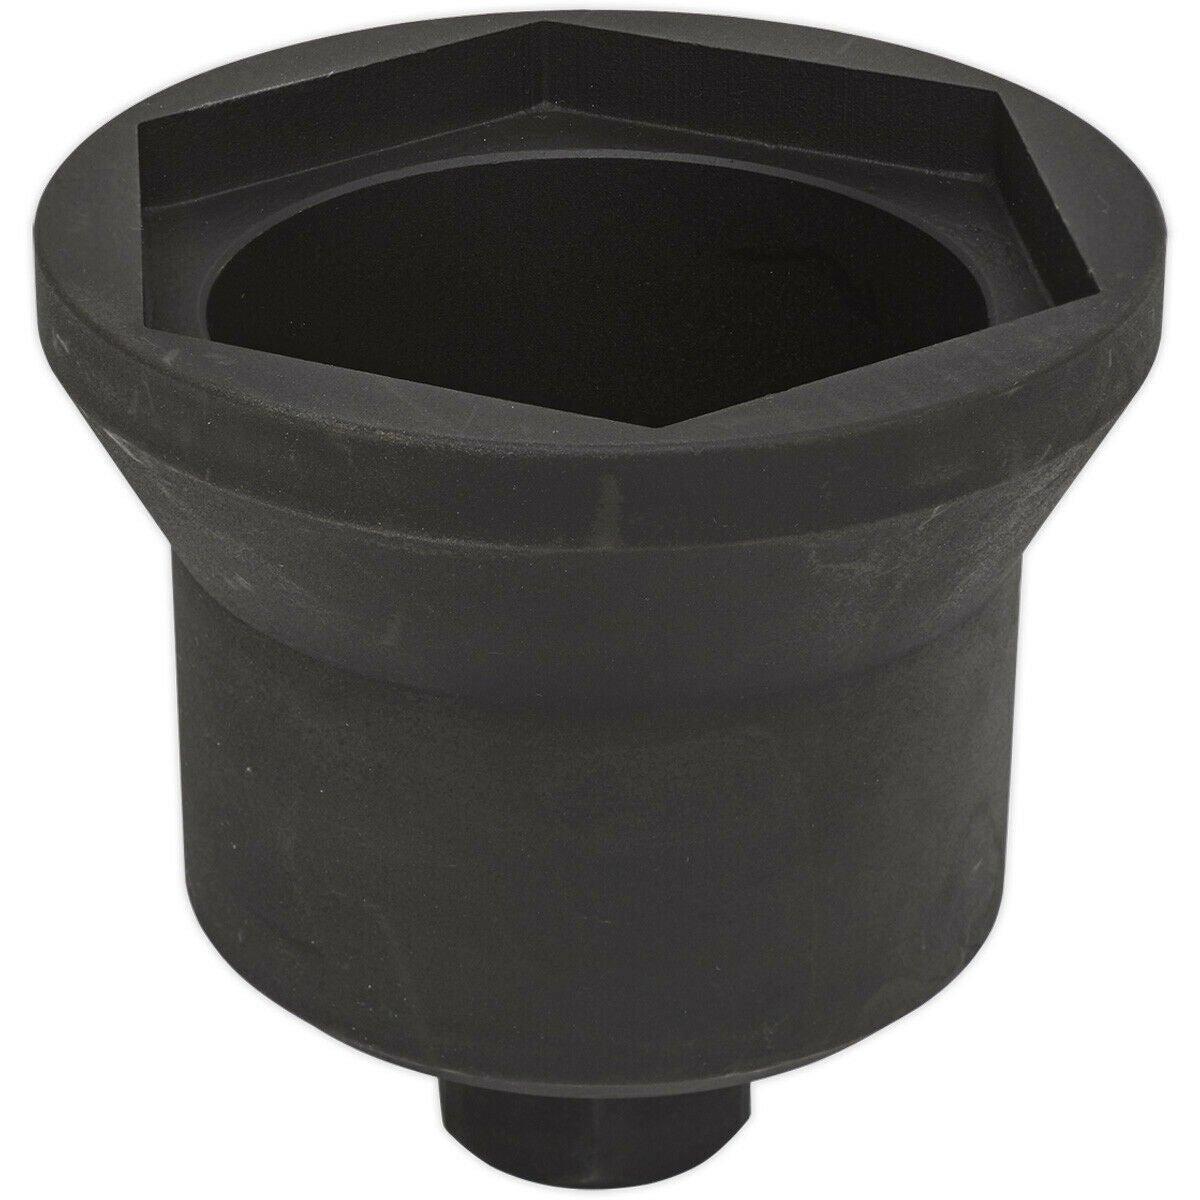 98mm IVECO Axle Nut Socket - 6 Point 36mm Hex Drive - Forged High Impact Bit